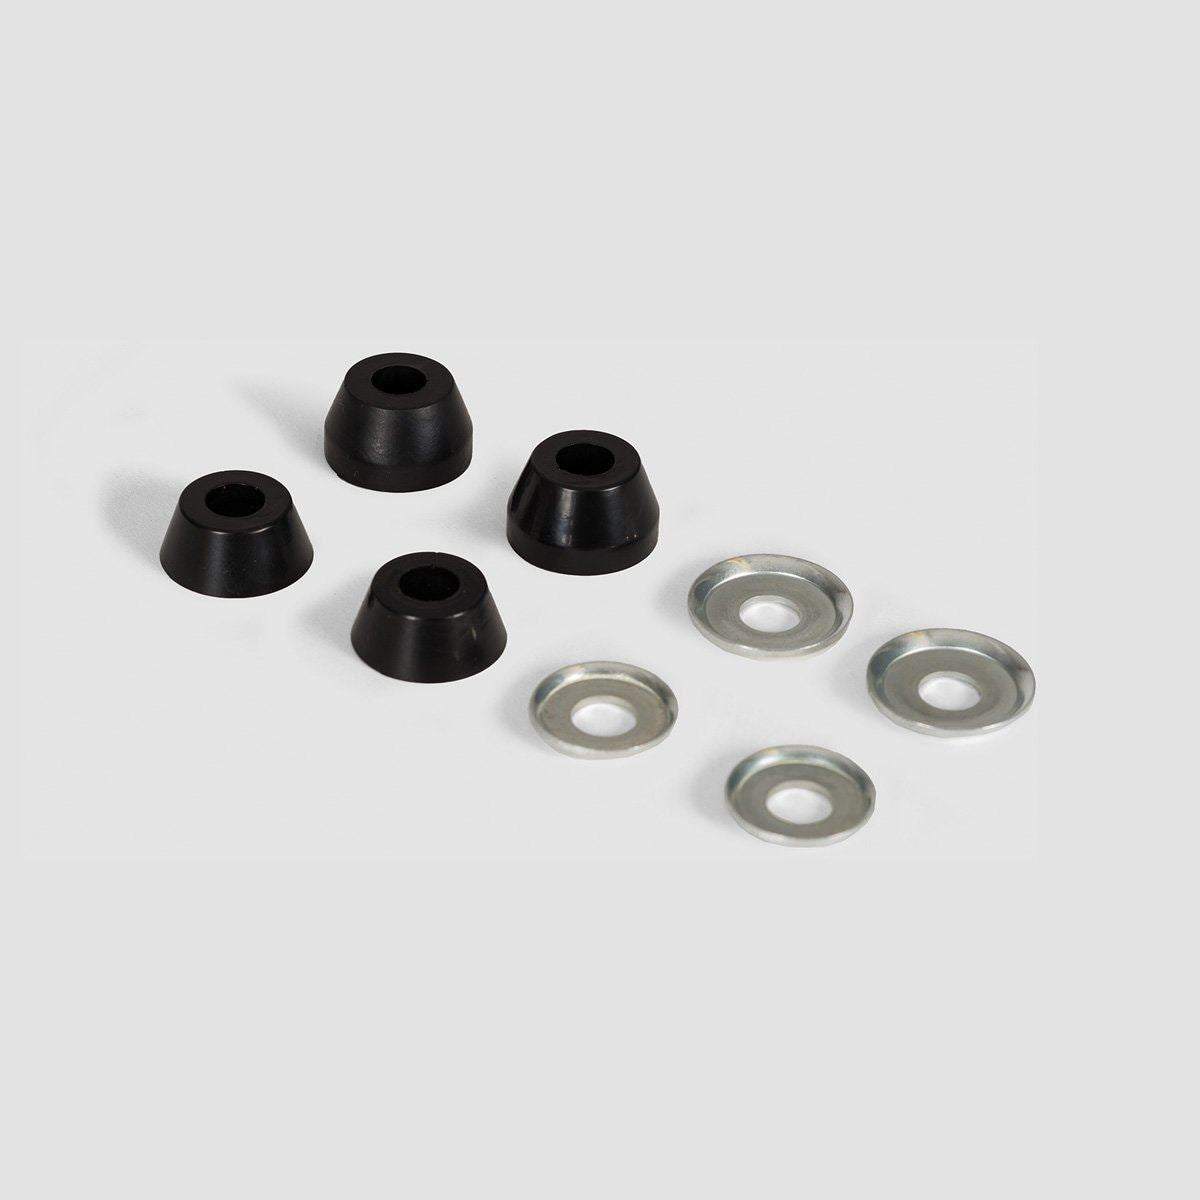 Independent Standard Conical Hard 94a Bushings Black